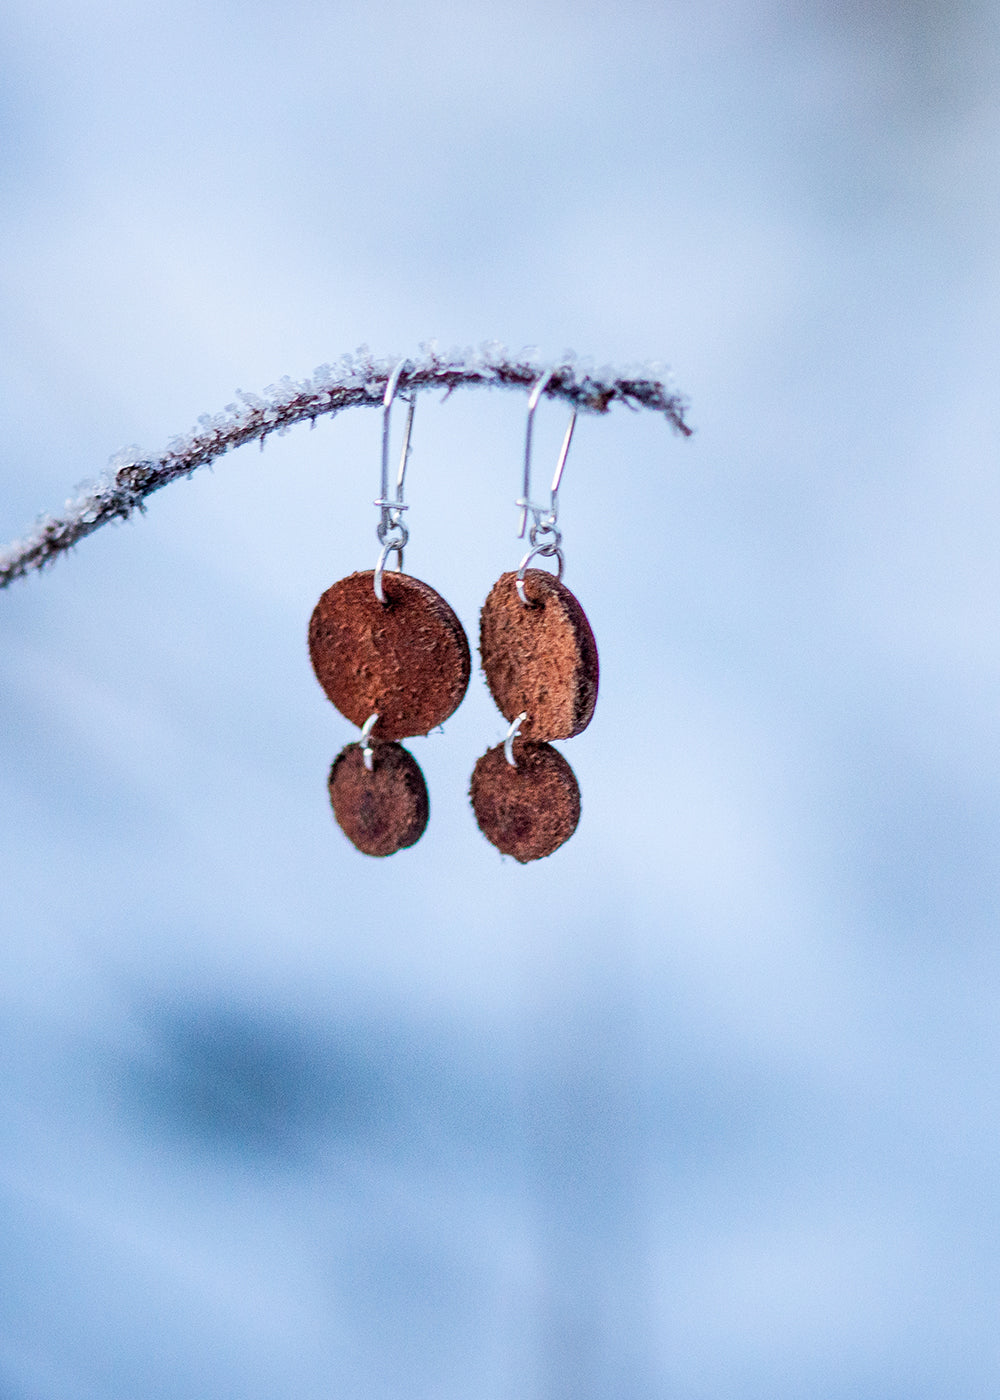 Light weight leather earrings "good enough"